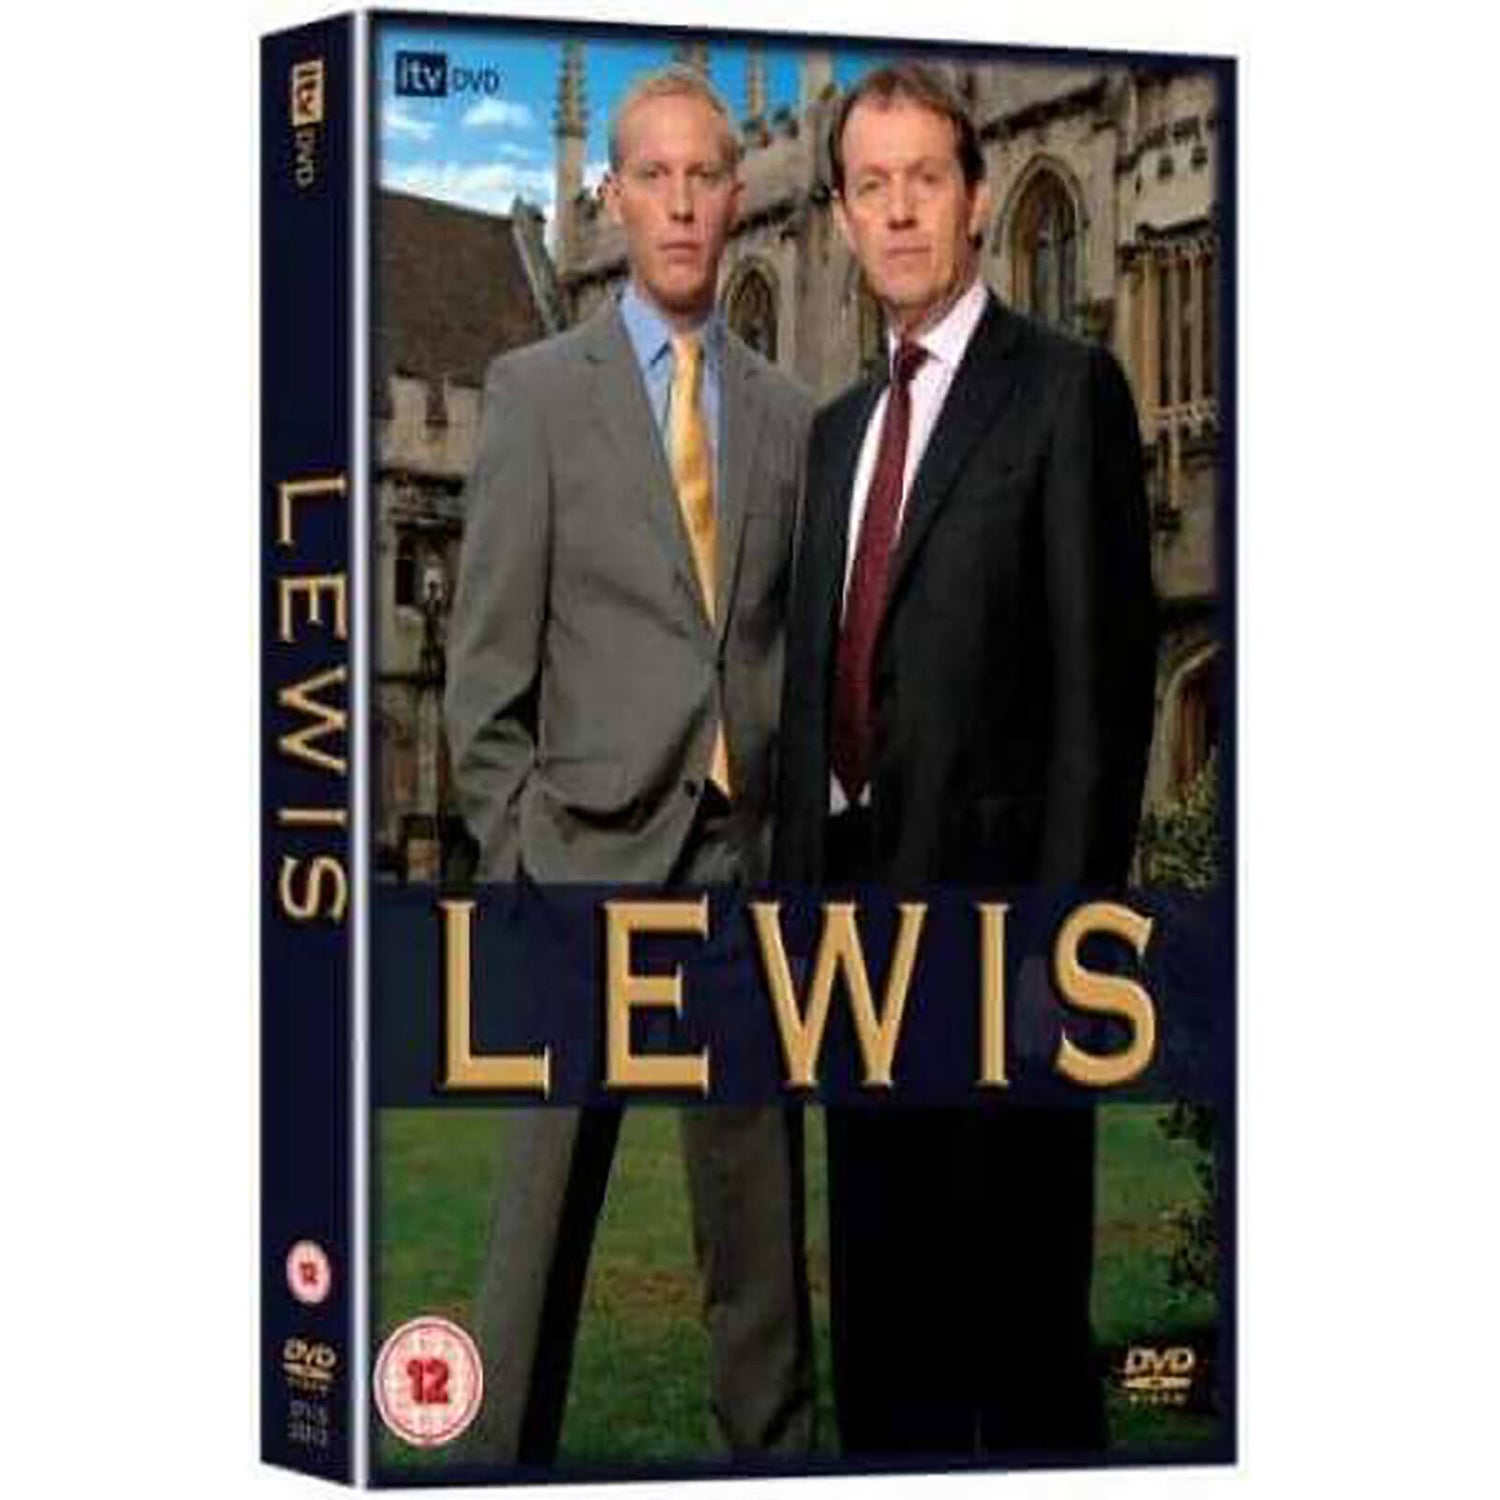 Lewis - Series 1 And Pilot Episode